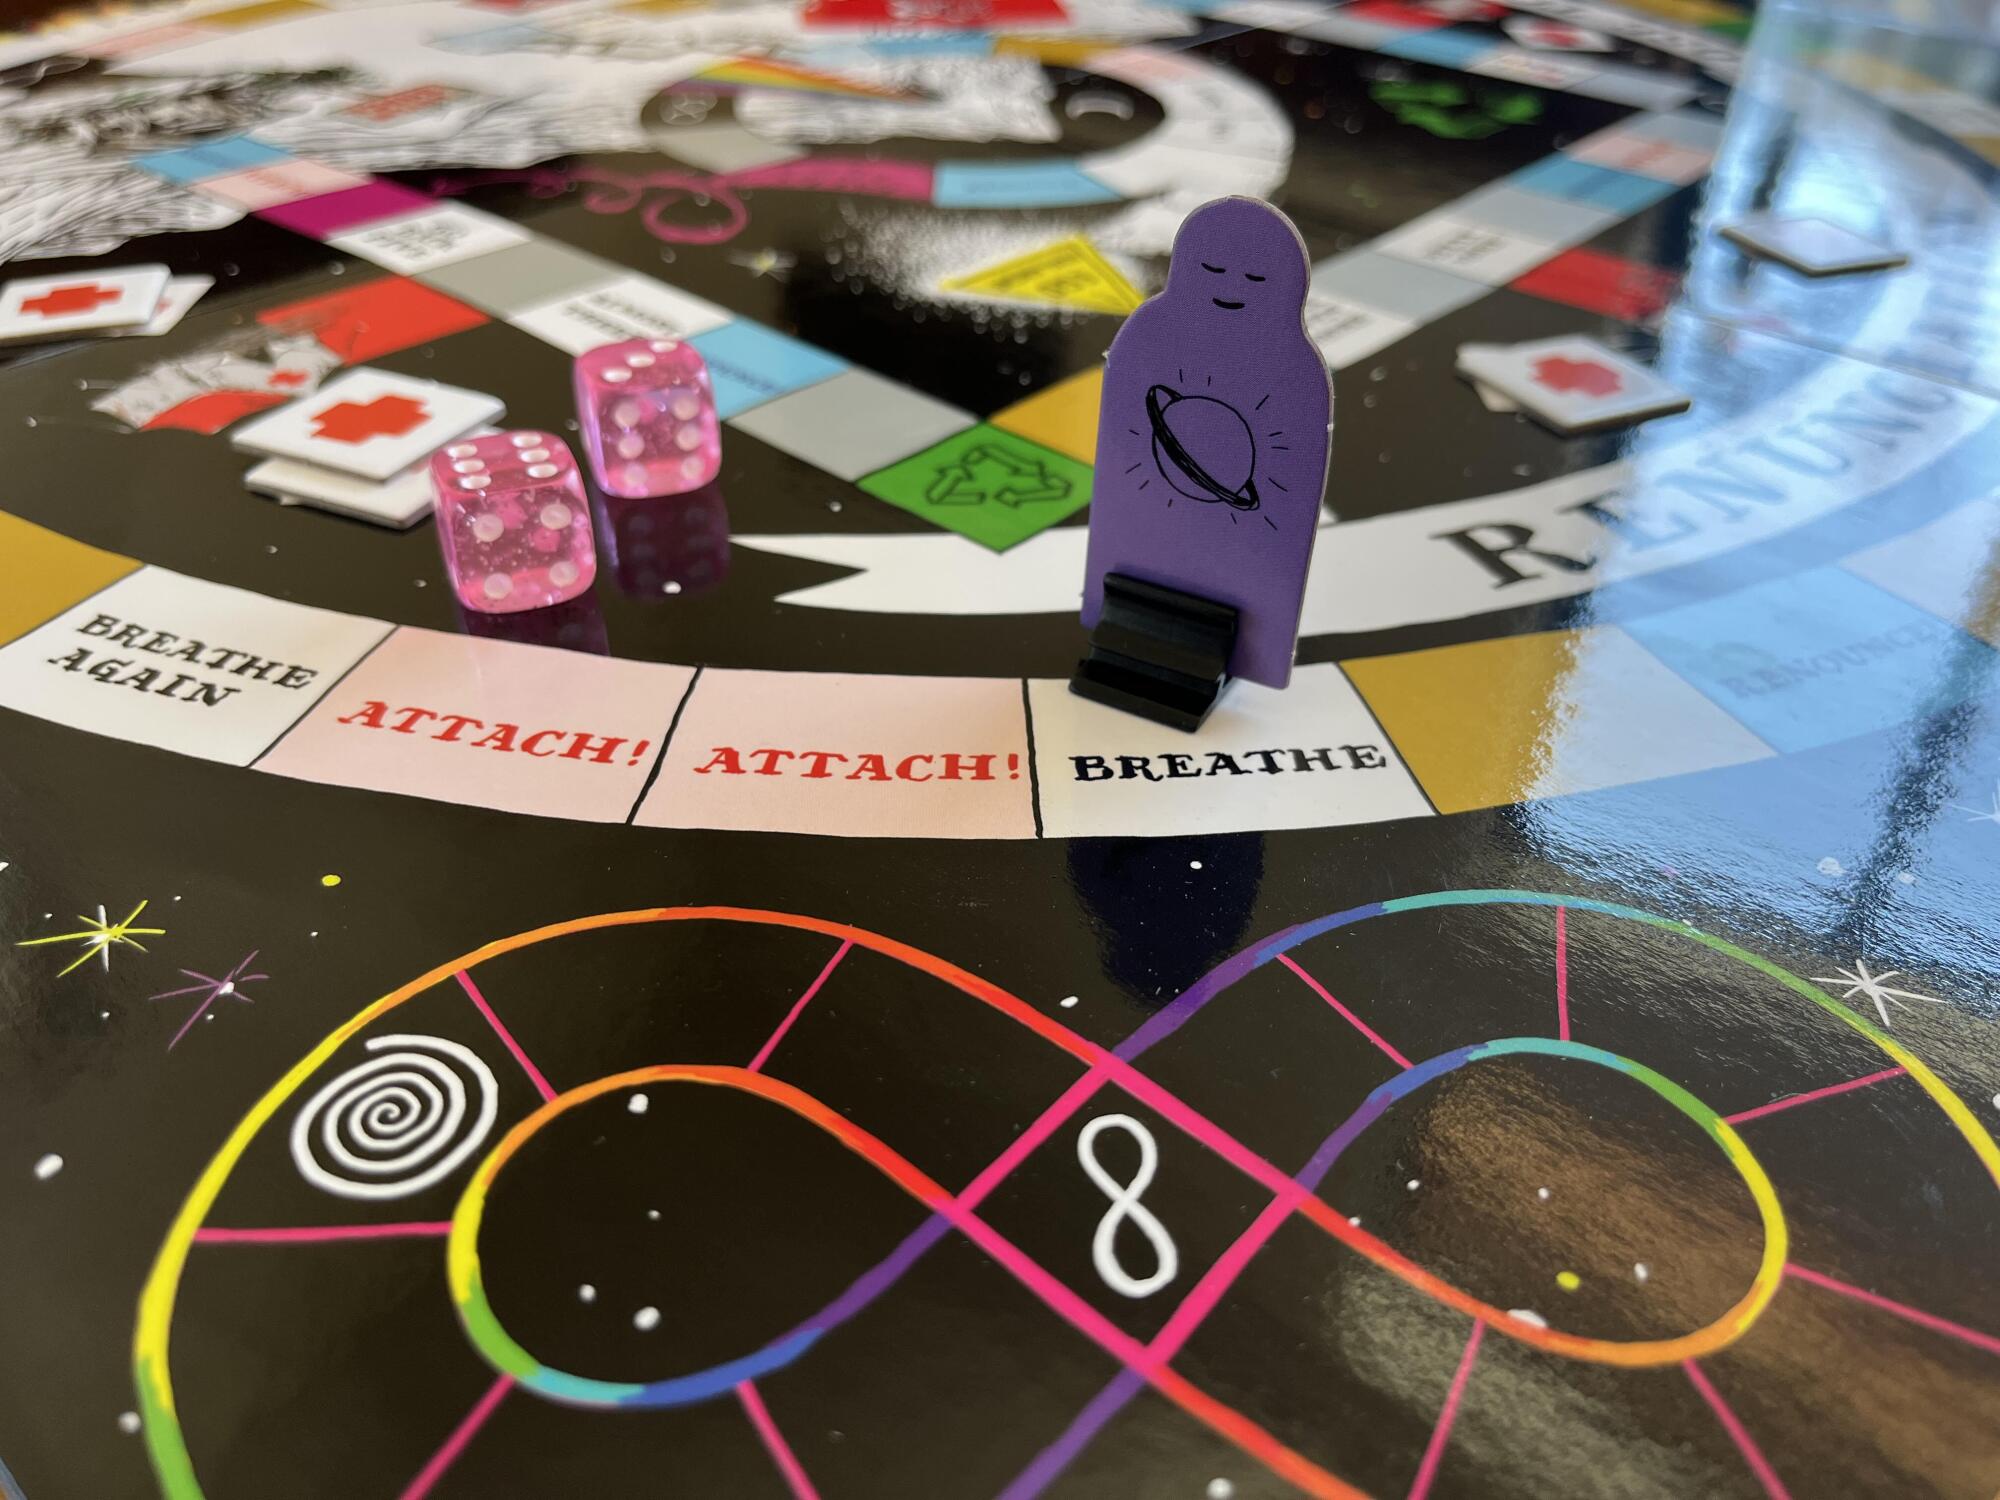 A round board game with esoteric symbols and words like "breathe" and "attach"